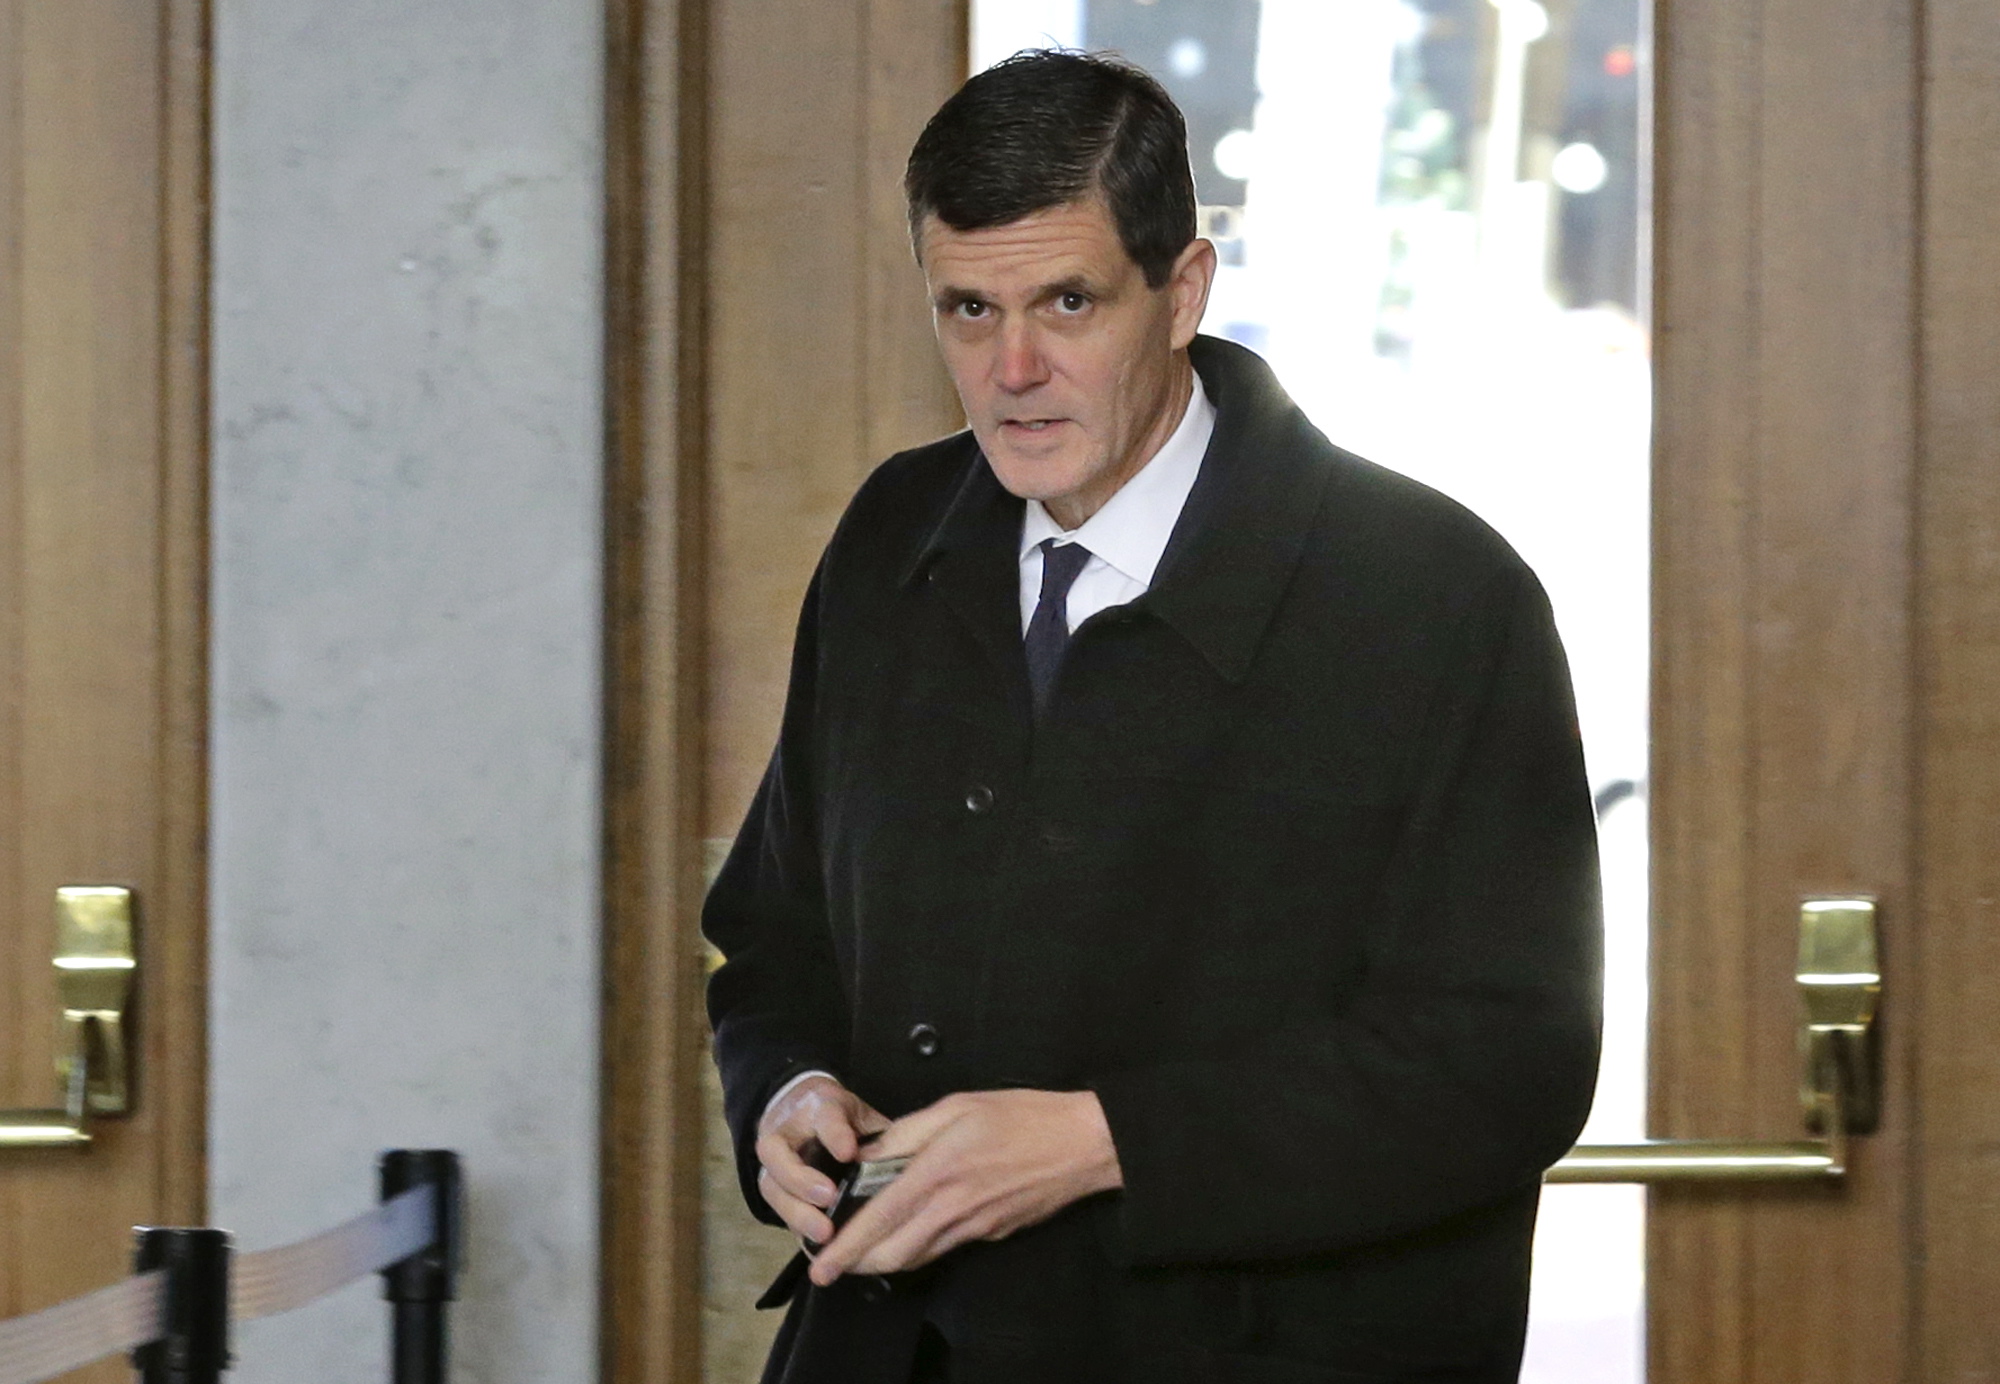 State Auditor Troy Kelley